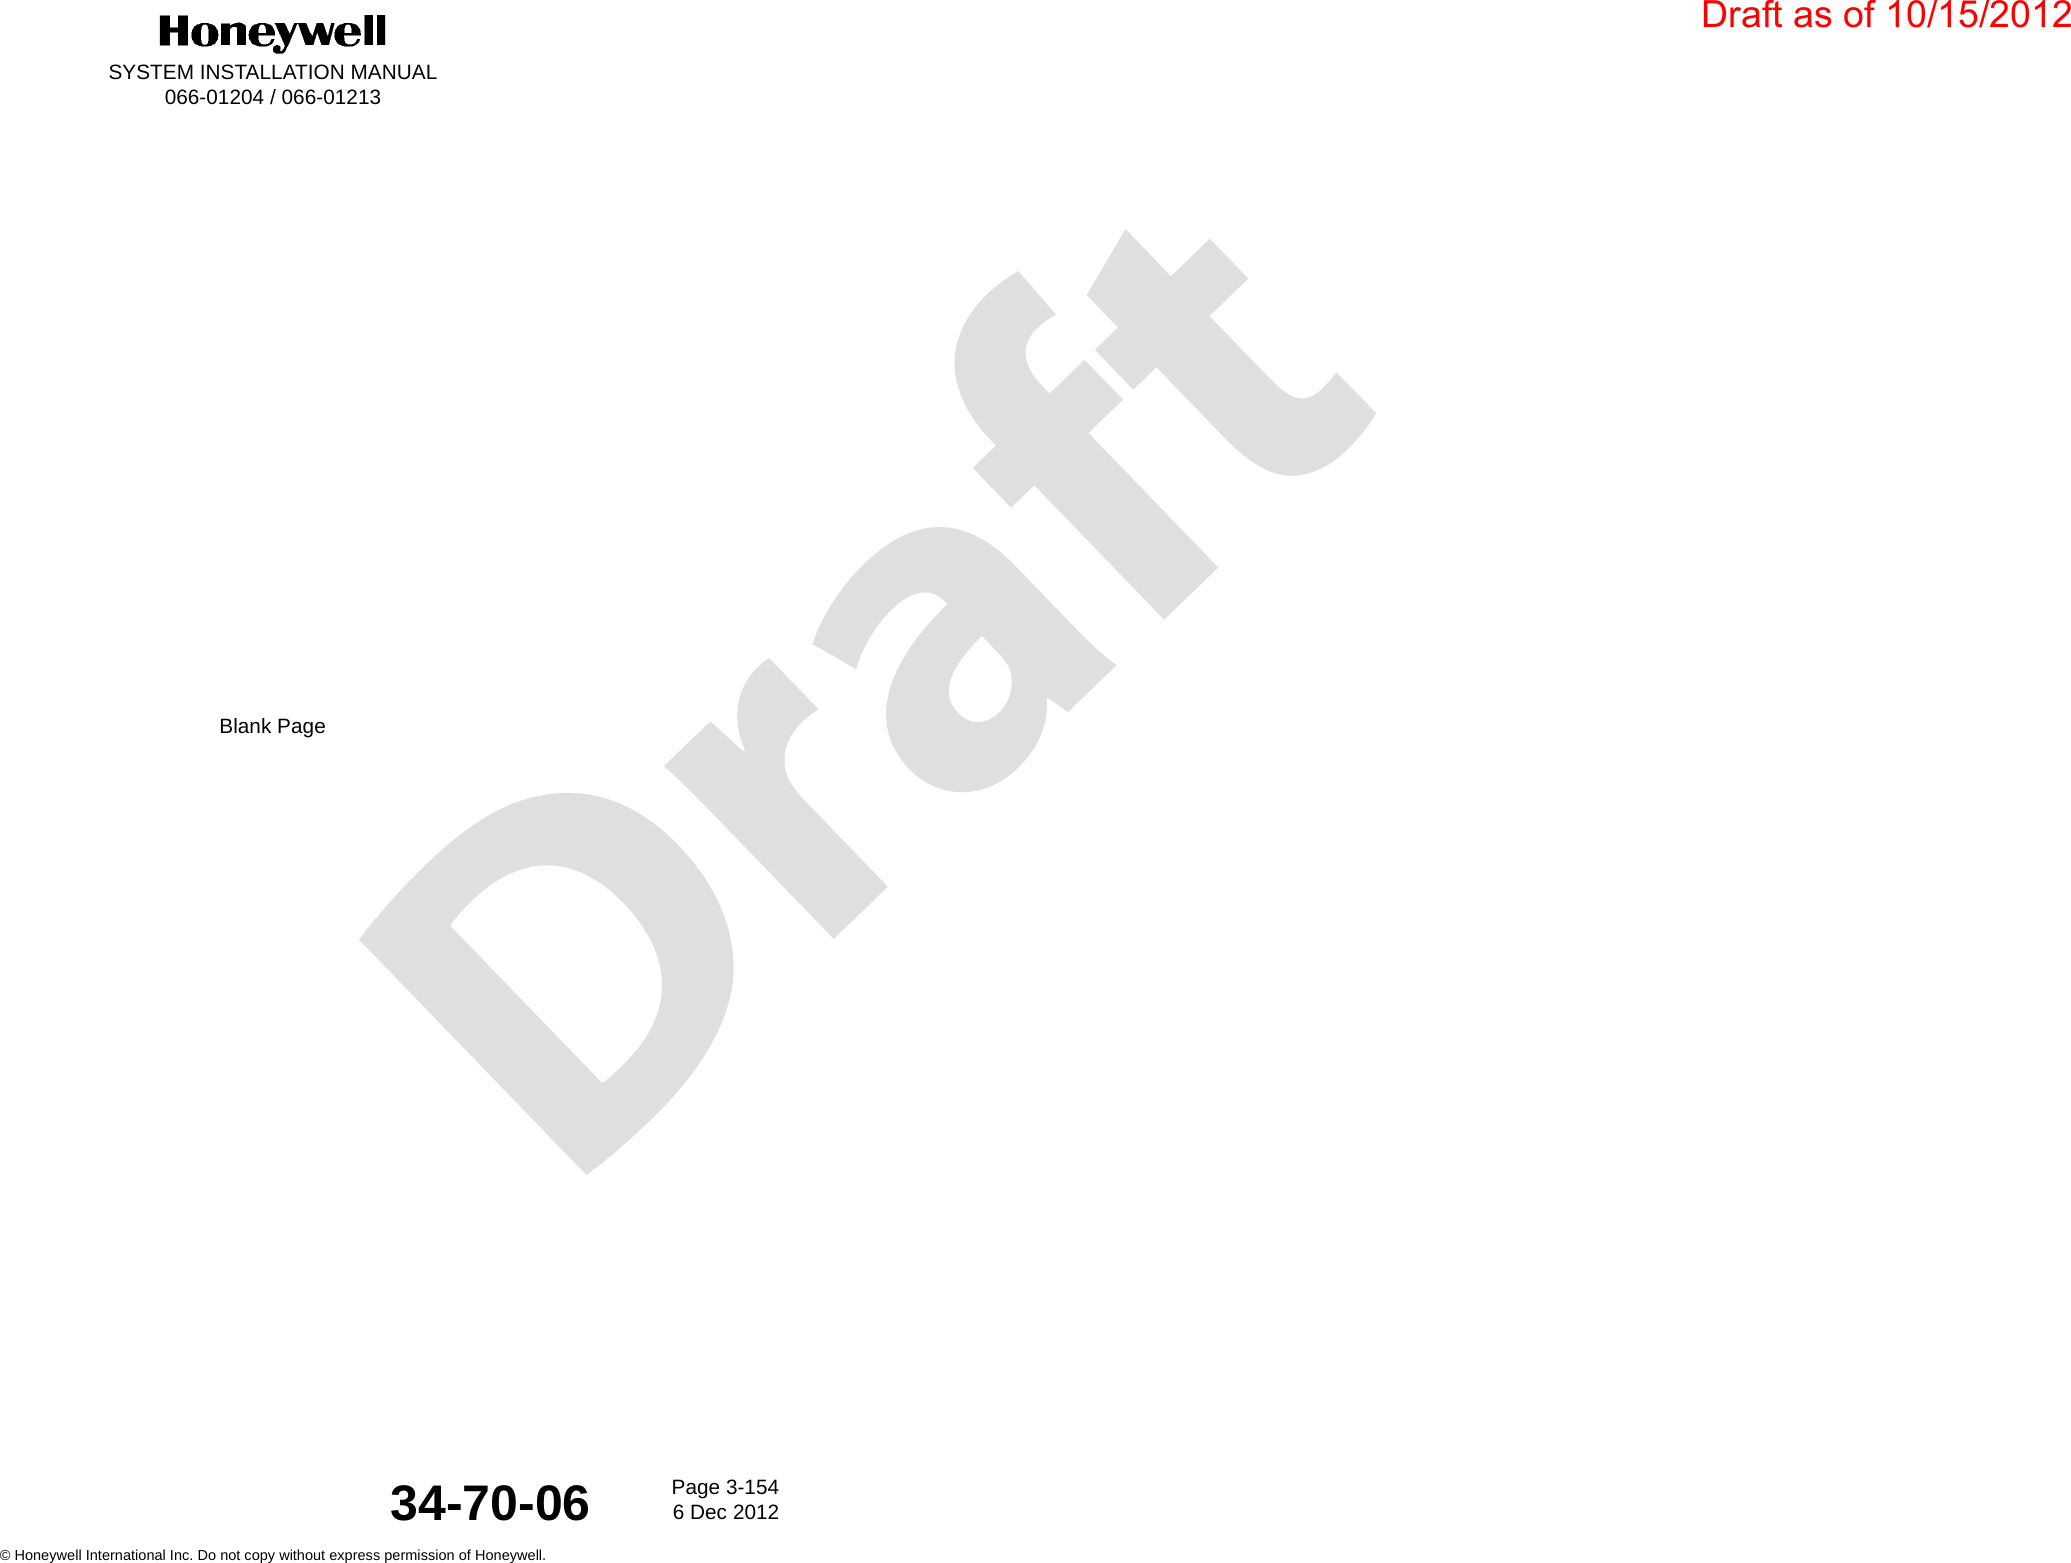 DraftSYSTEM INSTALLATION MANUAL066-01204 / 066-01213Page 3-1546 Dec 2012© Honeywell International Inc. Do not copy without express permission of Honeywell.34-70-06Blank PageDraft as of 10/15/2012